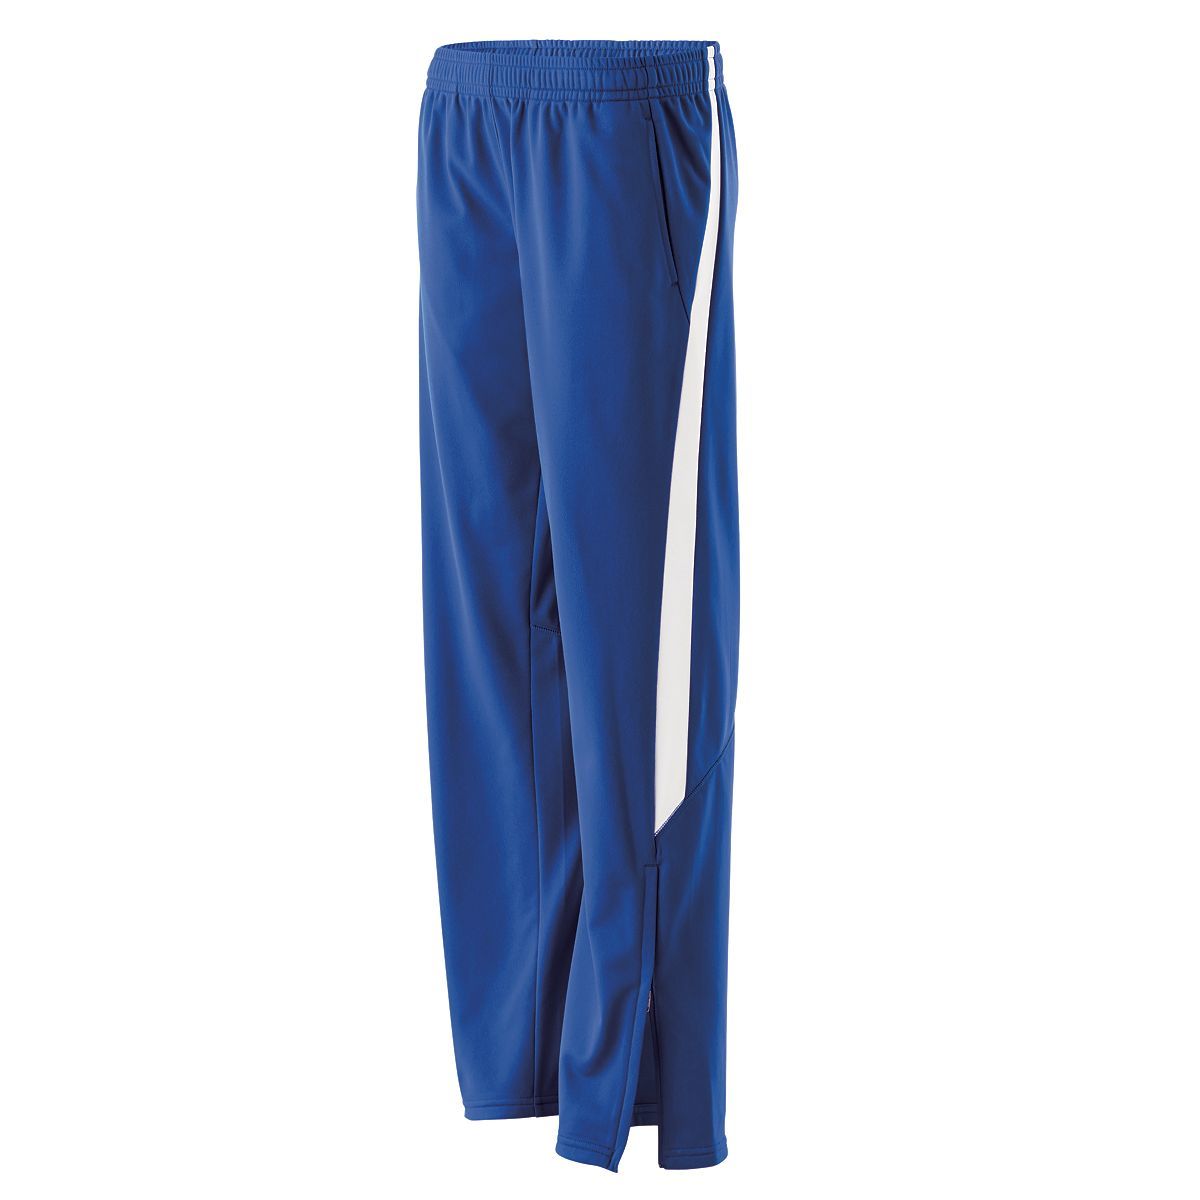 Holloway Ladies Determination Pant in Royal/White  -Part of the Ladies, Ladies-Pants, Pants, Holloway product lines at KanaleyCreations.com